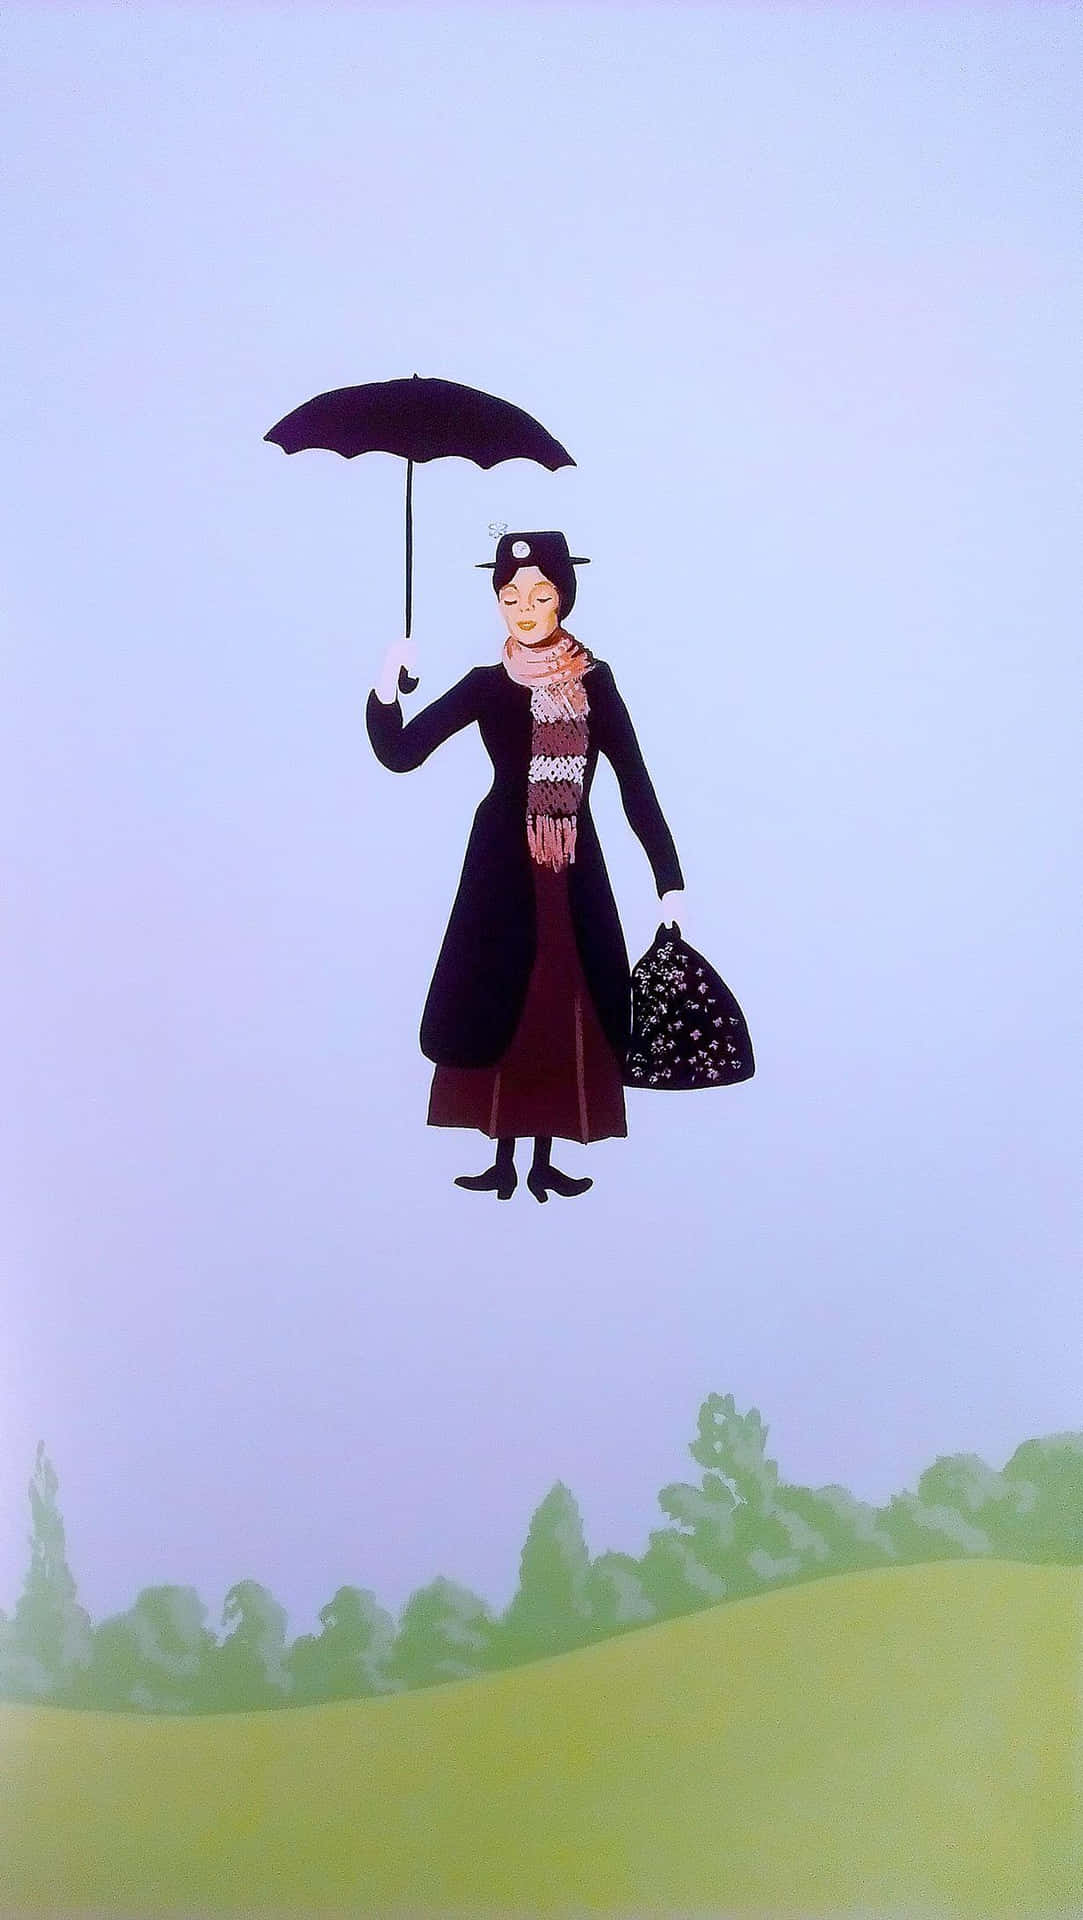 Enchanting Mary Poppins Flies High In The Sky Background